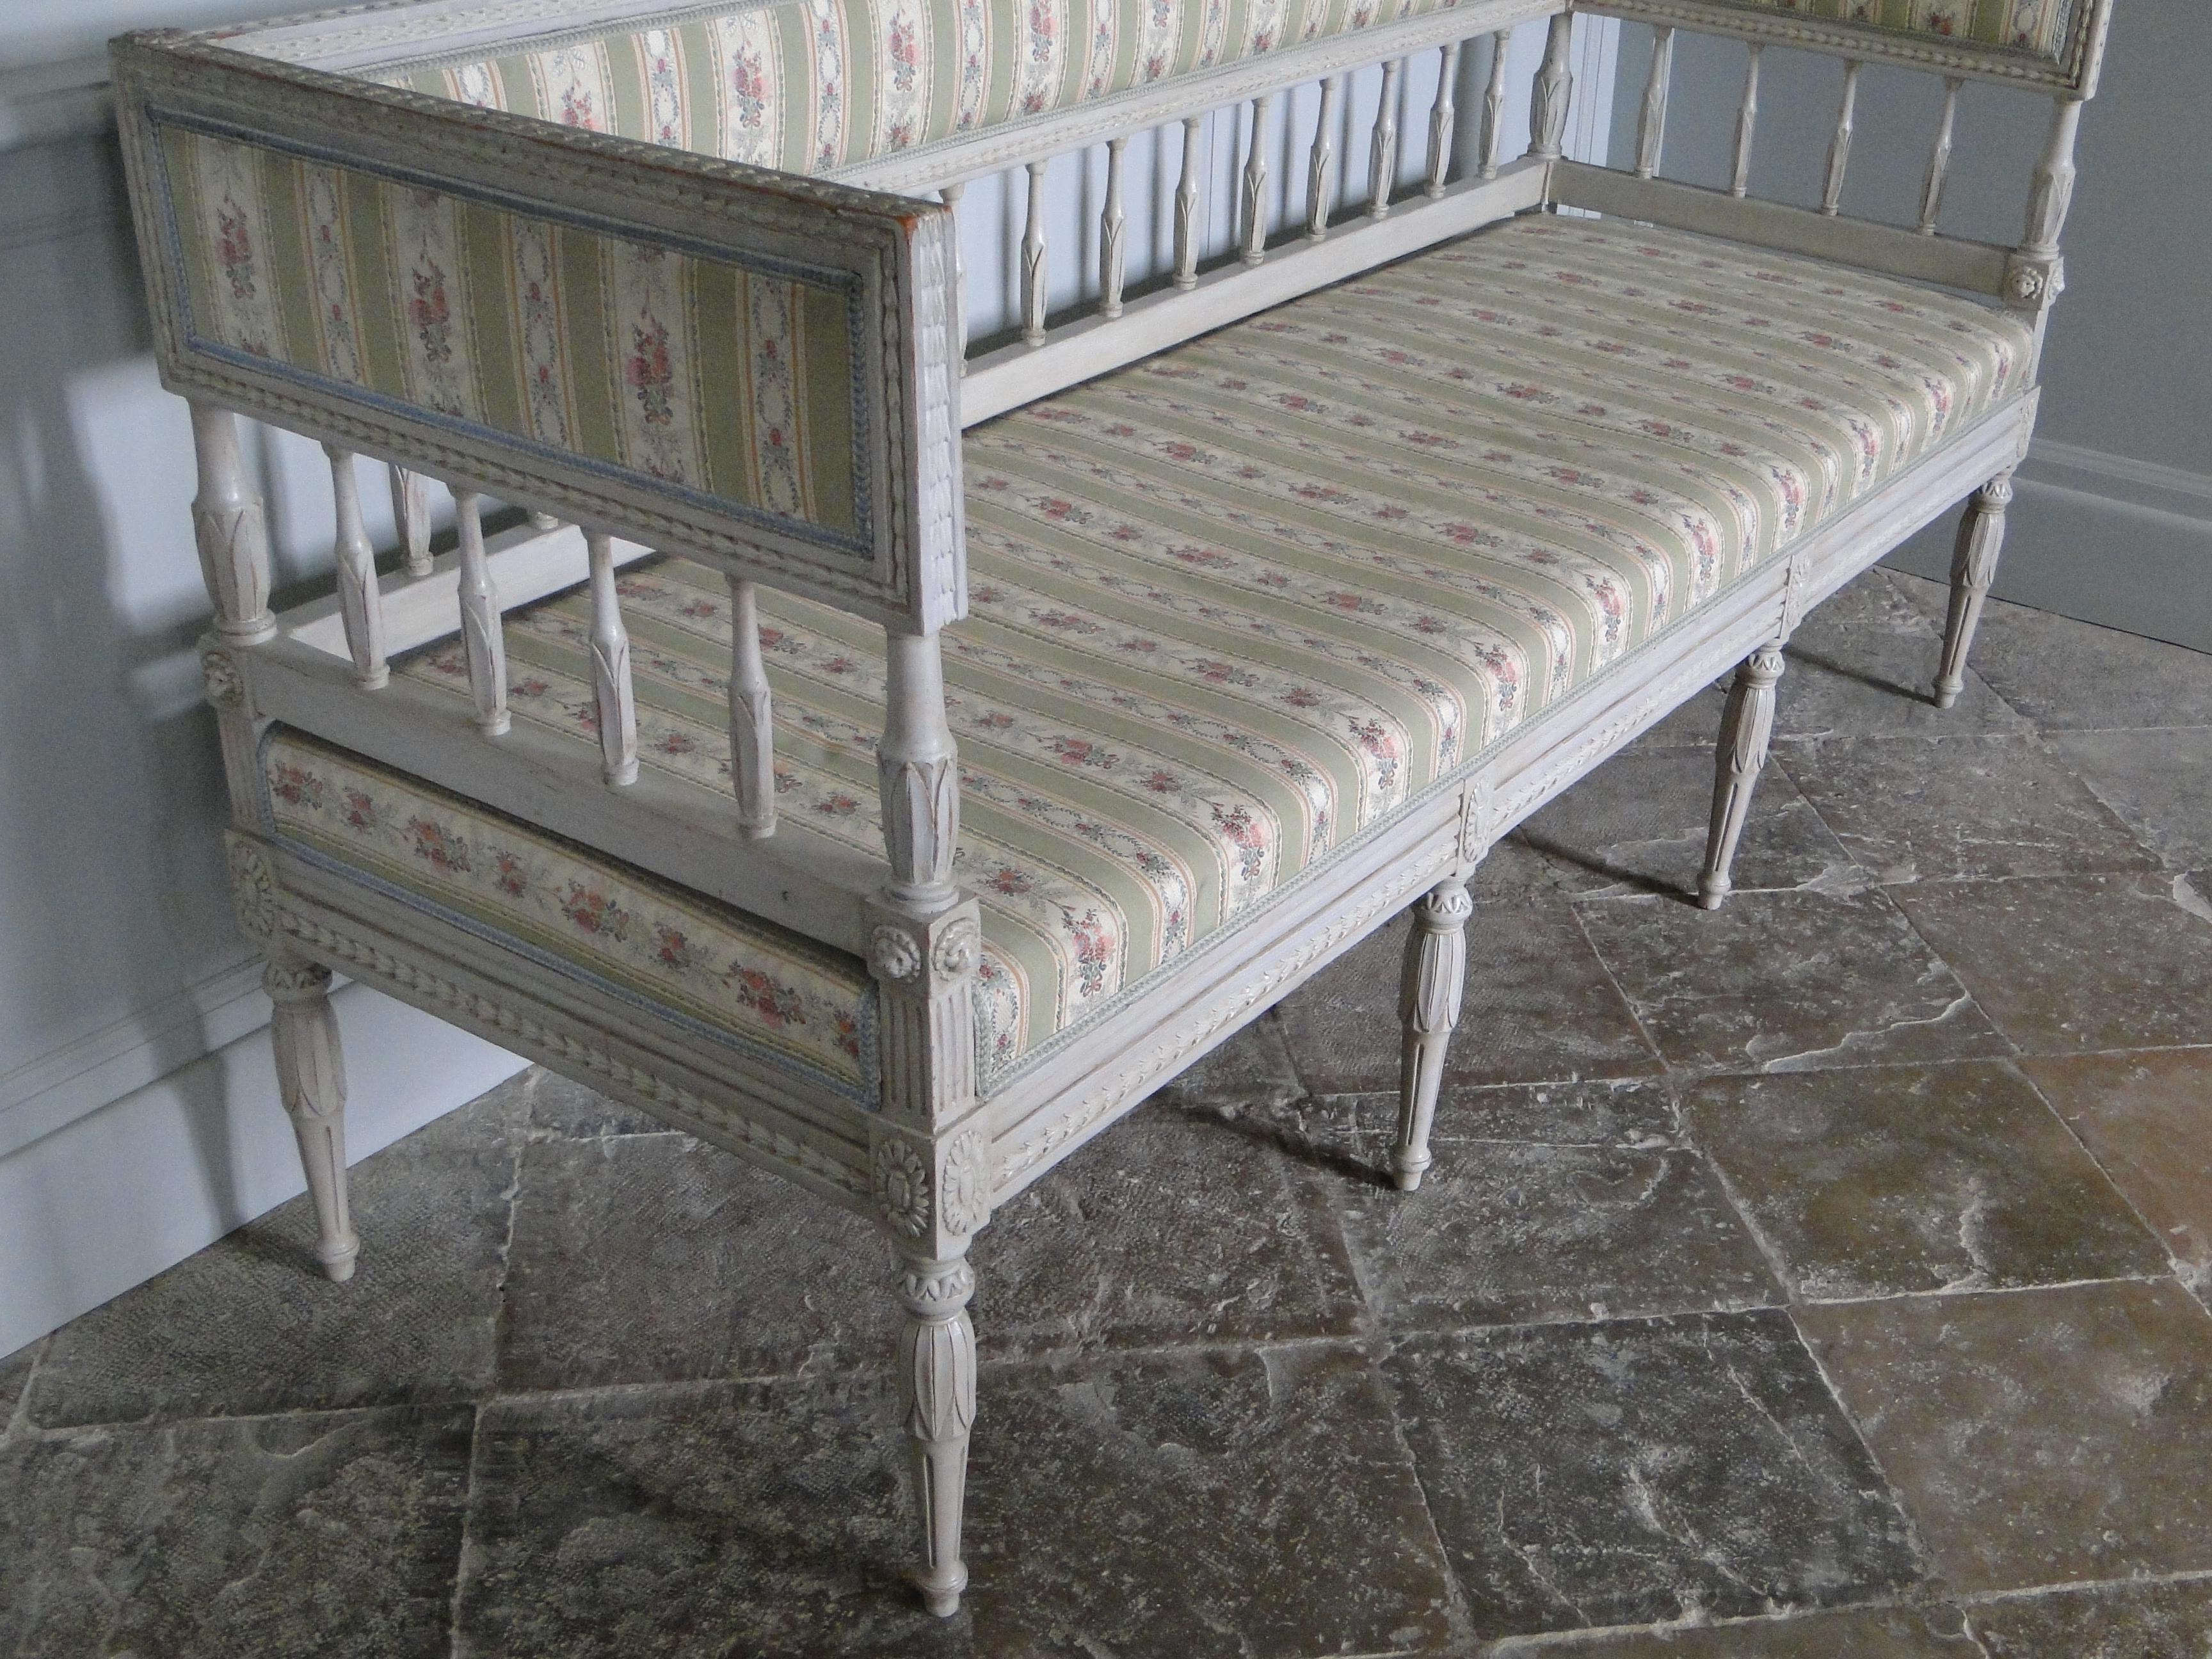 Swedish, Gustavian Style, sofa 19th century in a very good condition.